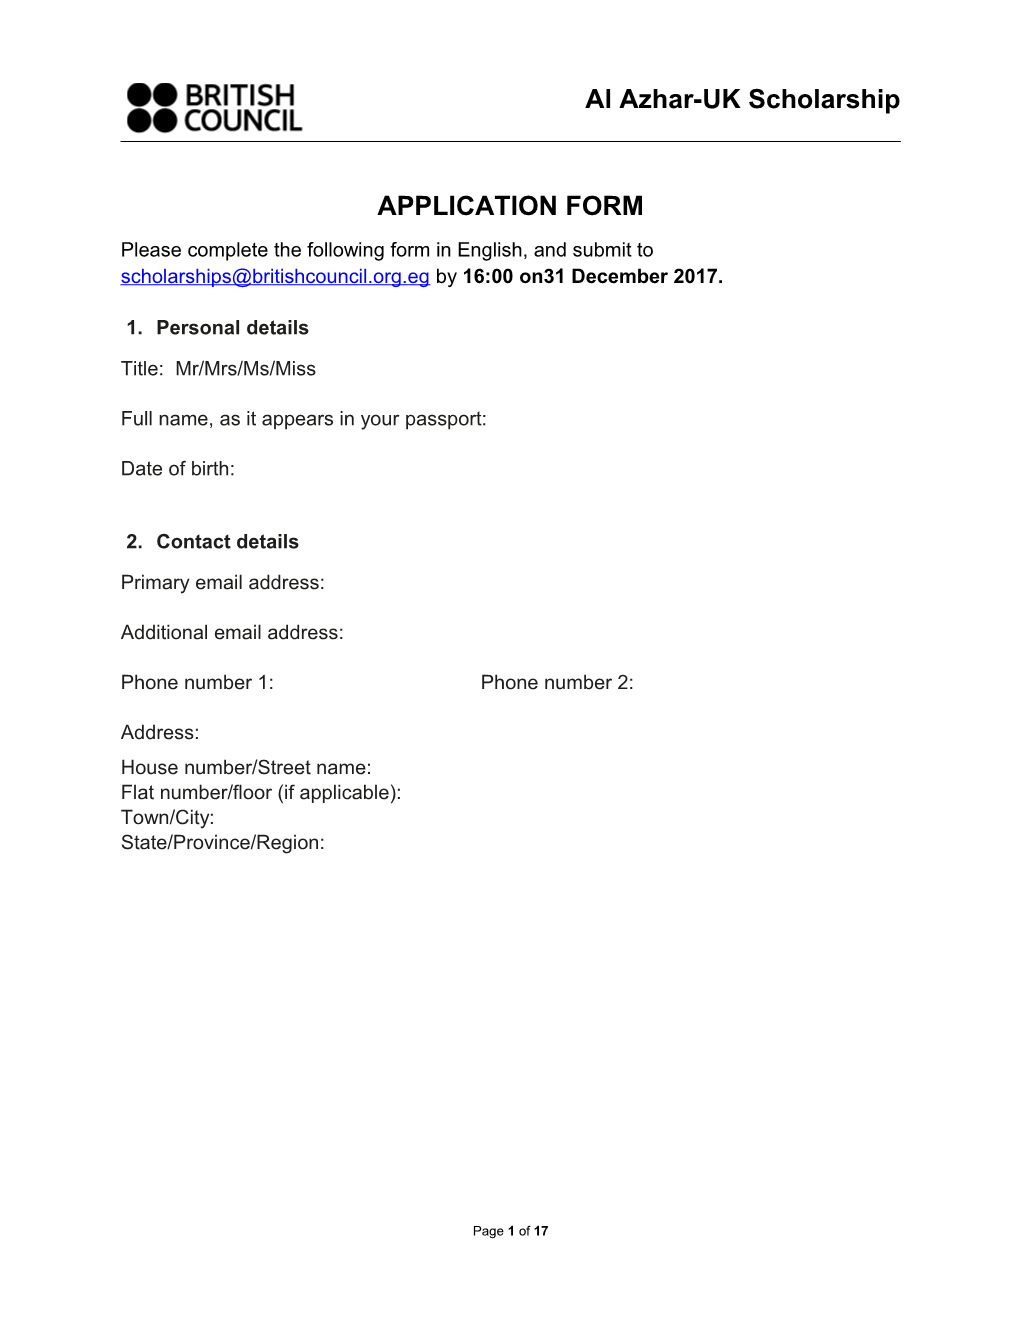 Application Form s34